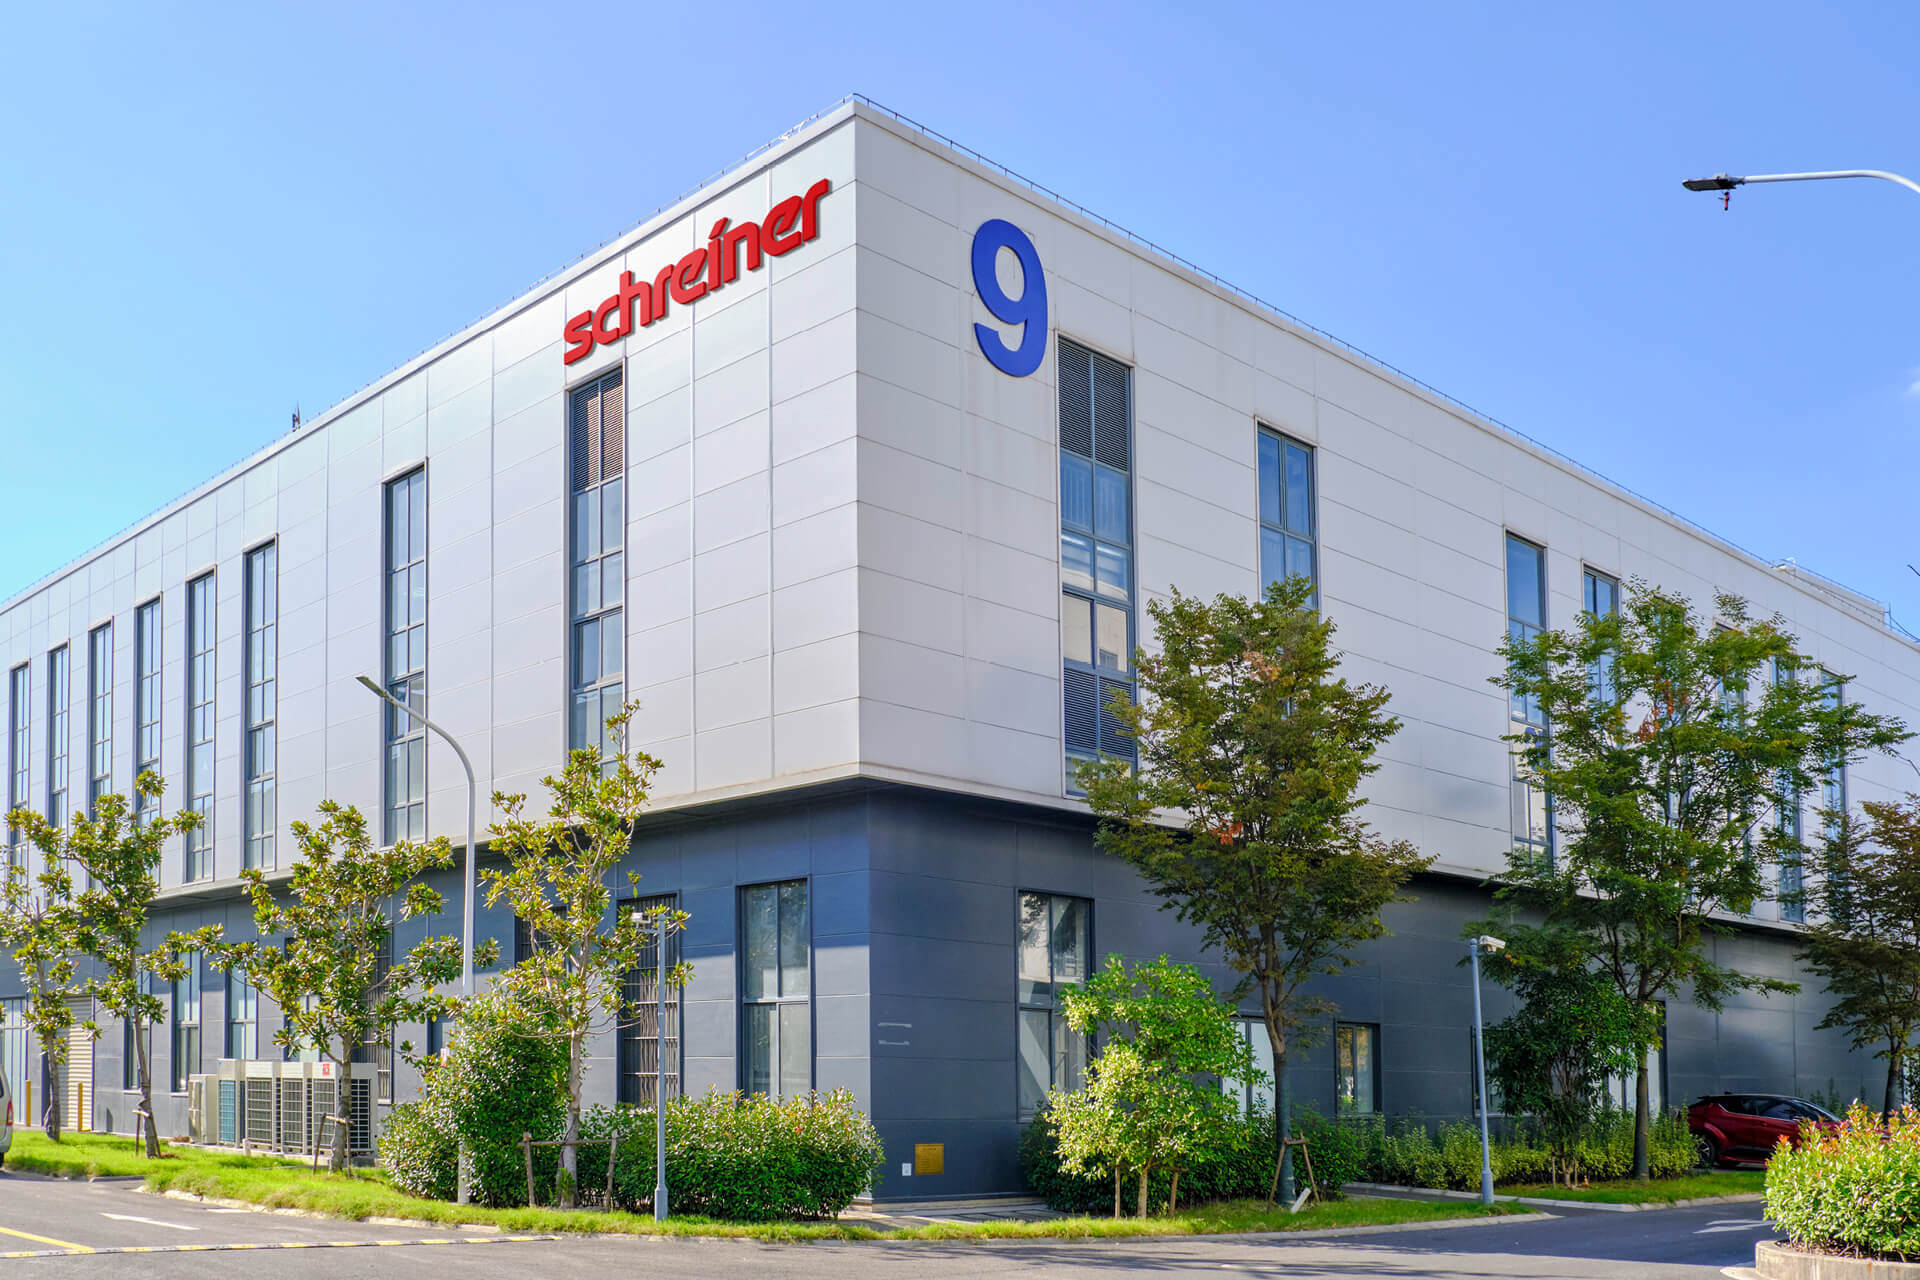 This is what Schreiner Group’s new state-of-the-art site in Jinshan, China, looks like.